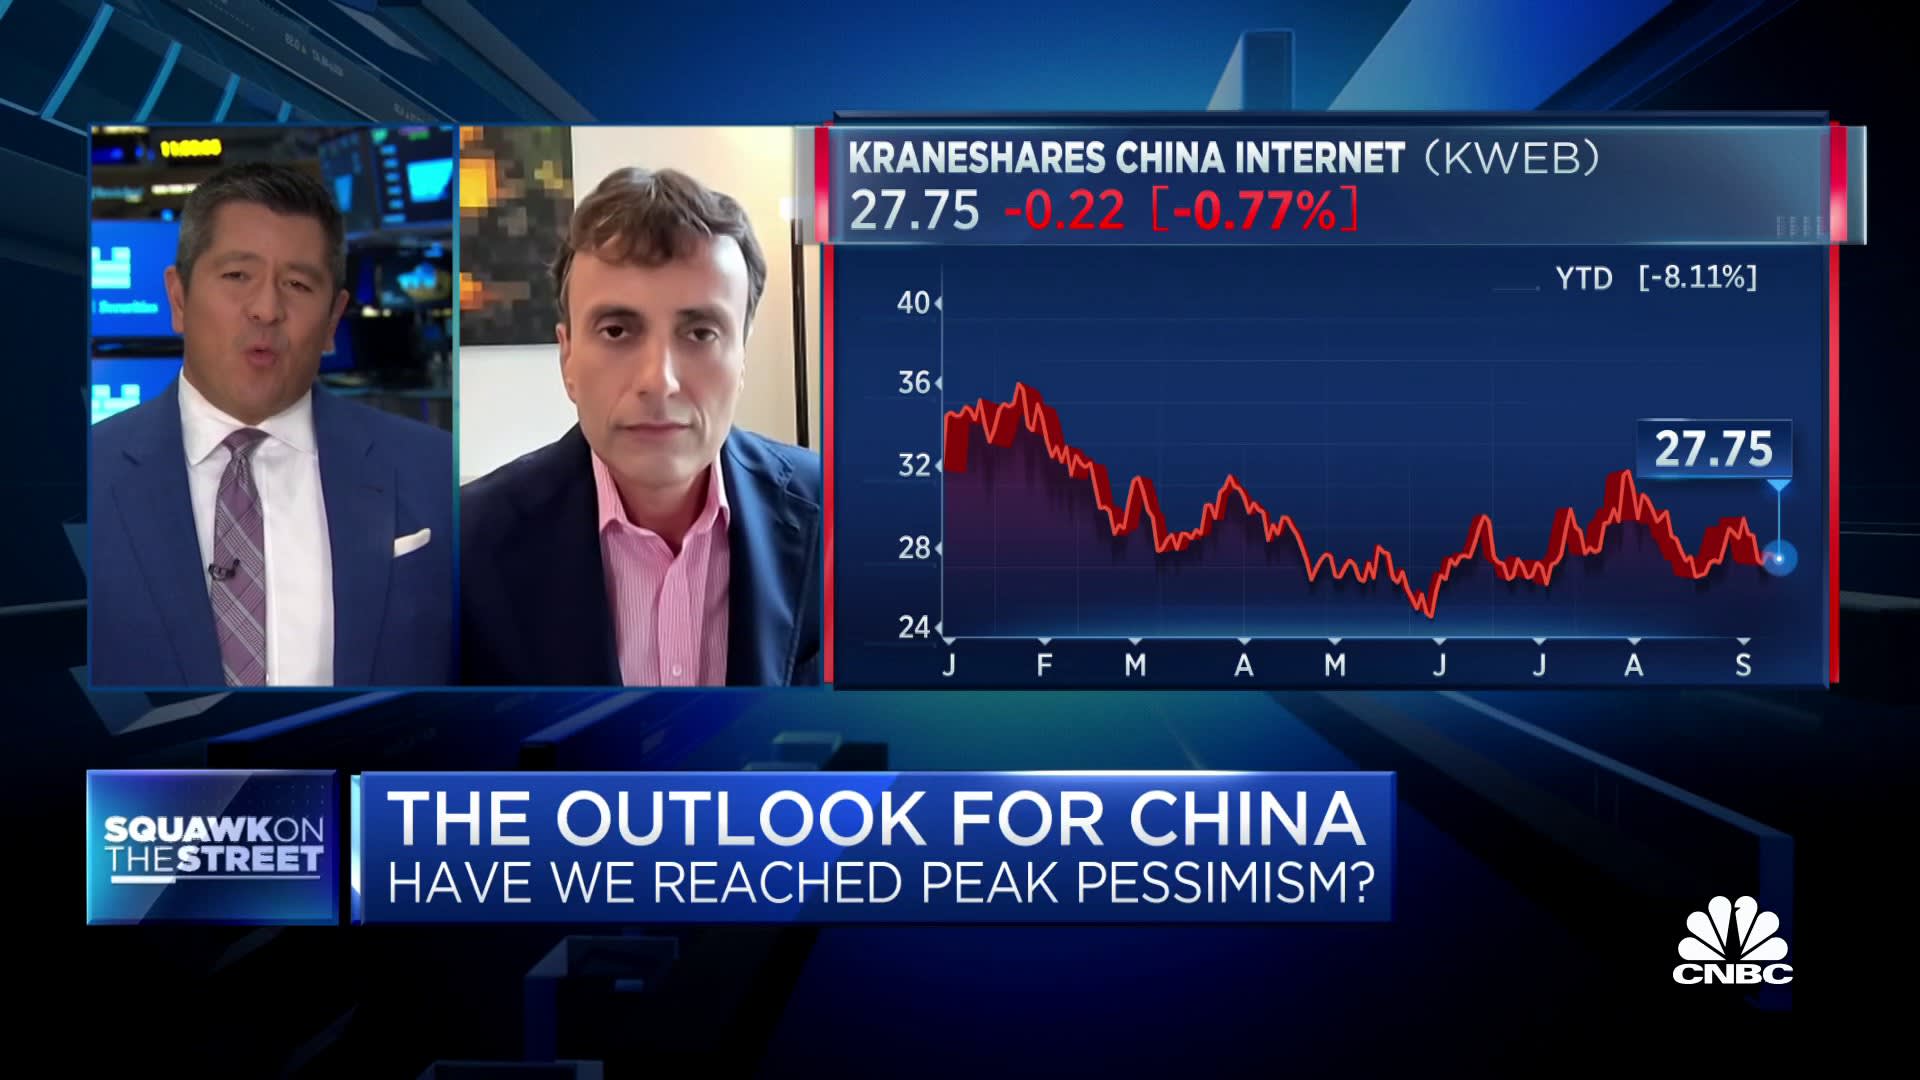 Rockefellerâ€™s Ruchir Sharma: To completely disengage from China could be a 'bit risky'